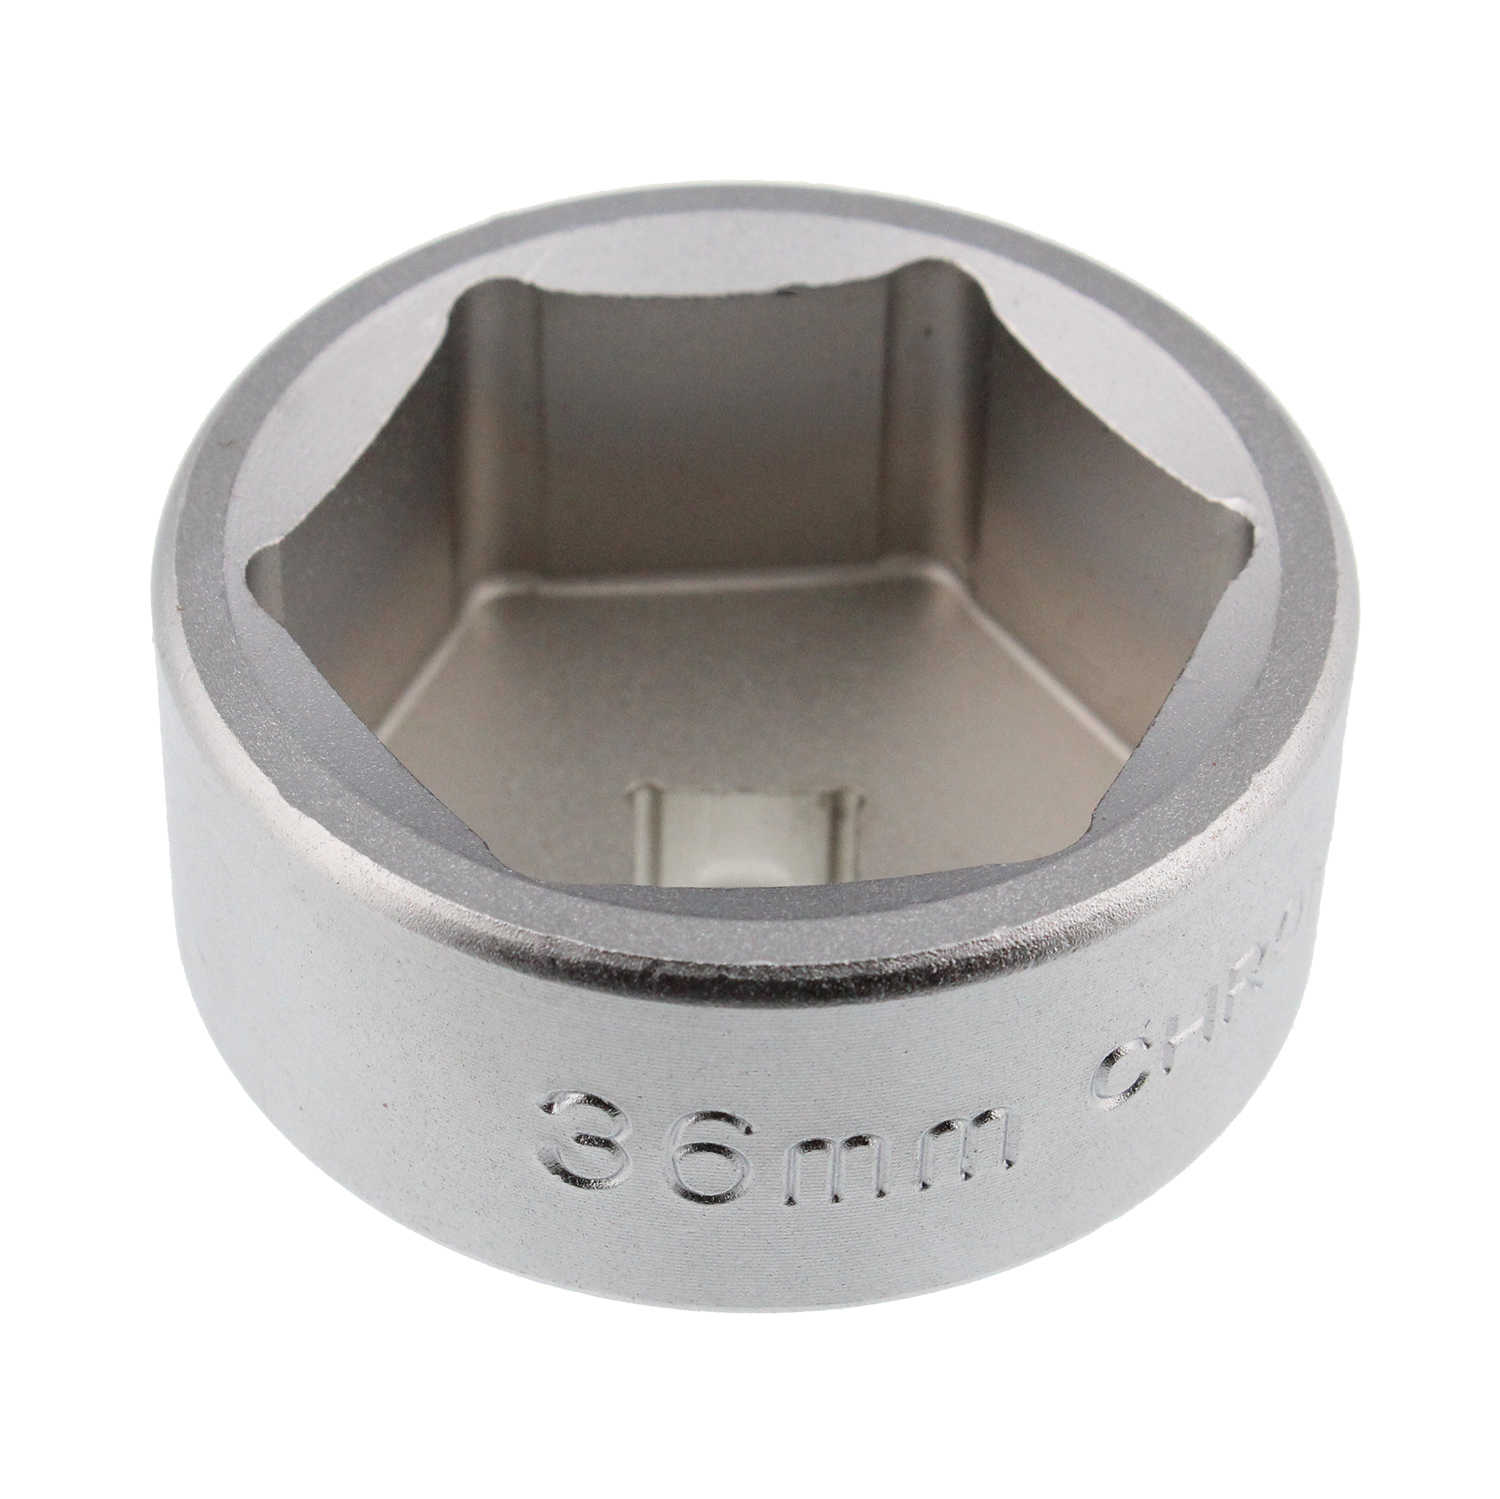 ABN 36mm Metric Low Profile Oil Filter Socket Wrench to Remove Canister Housing